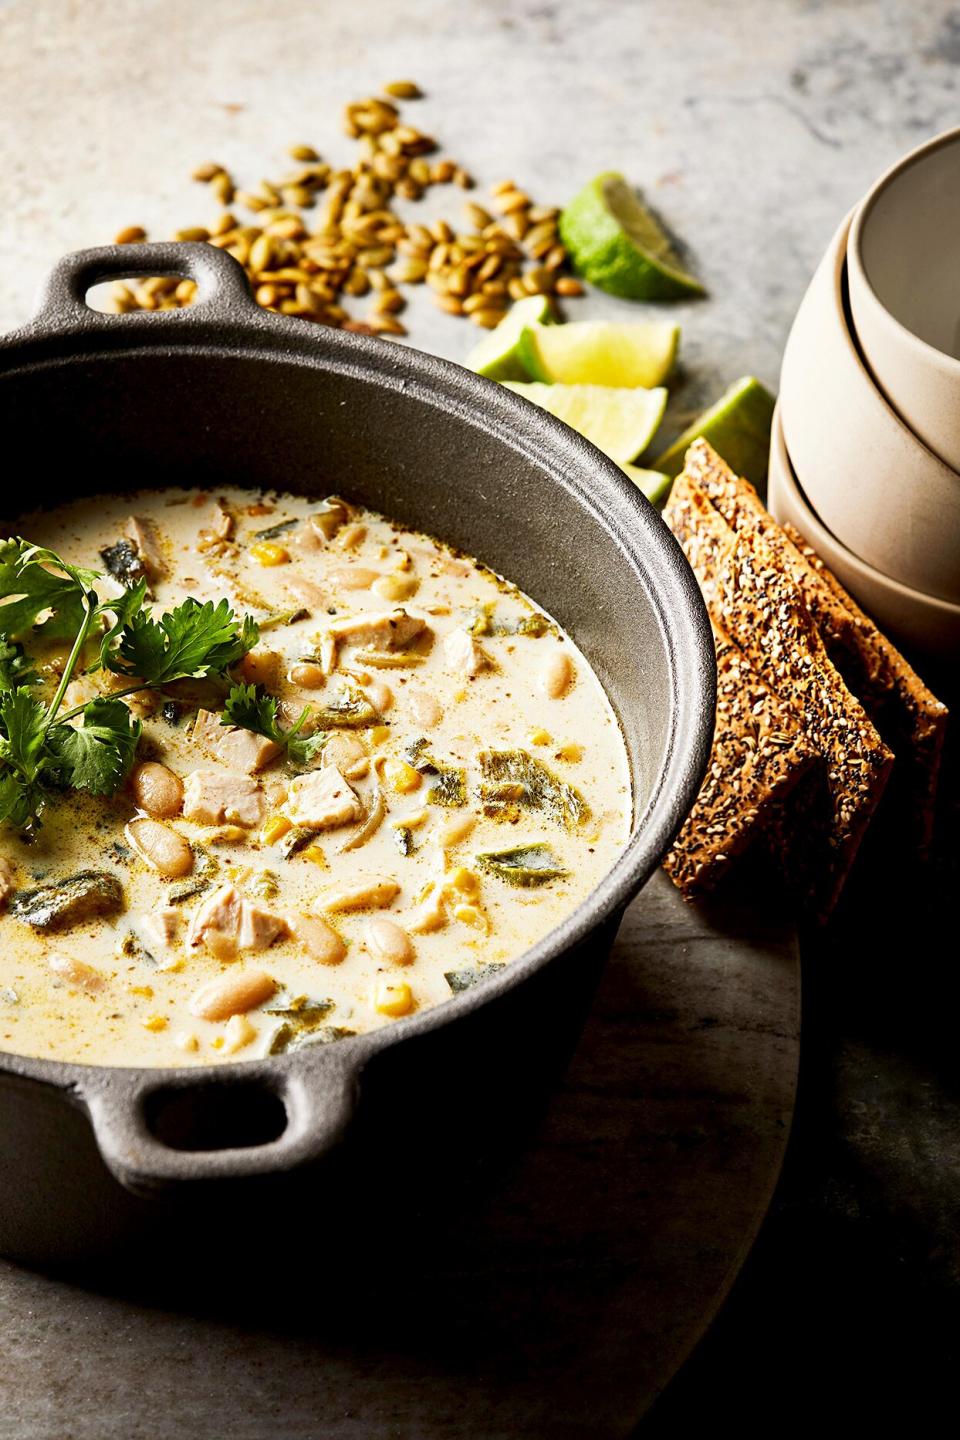 A creamy take on chili with chunks of tender chicken and white beans is the perfect way to warm up a cold night. Try our slow cooker or pressure cooker versions to fit your time schedule.